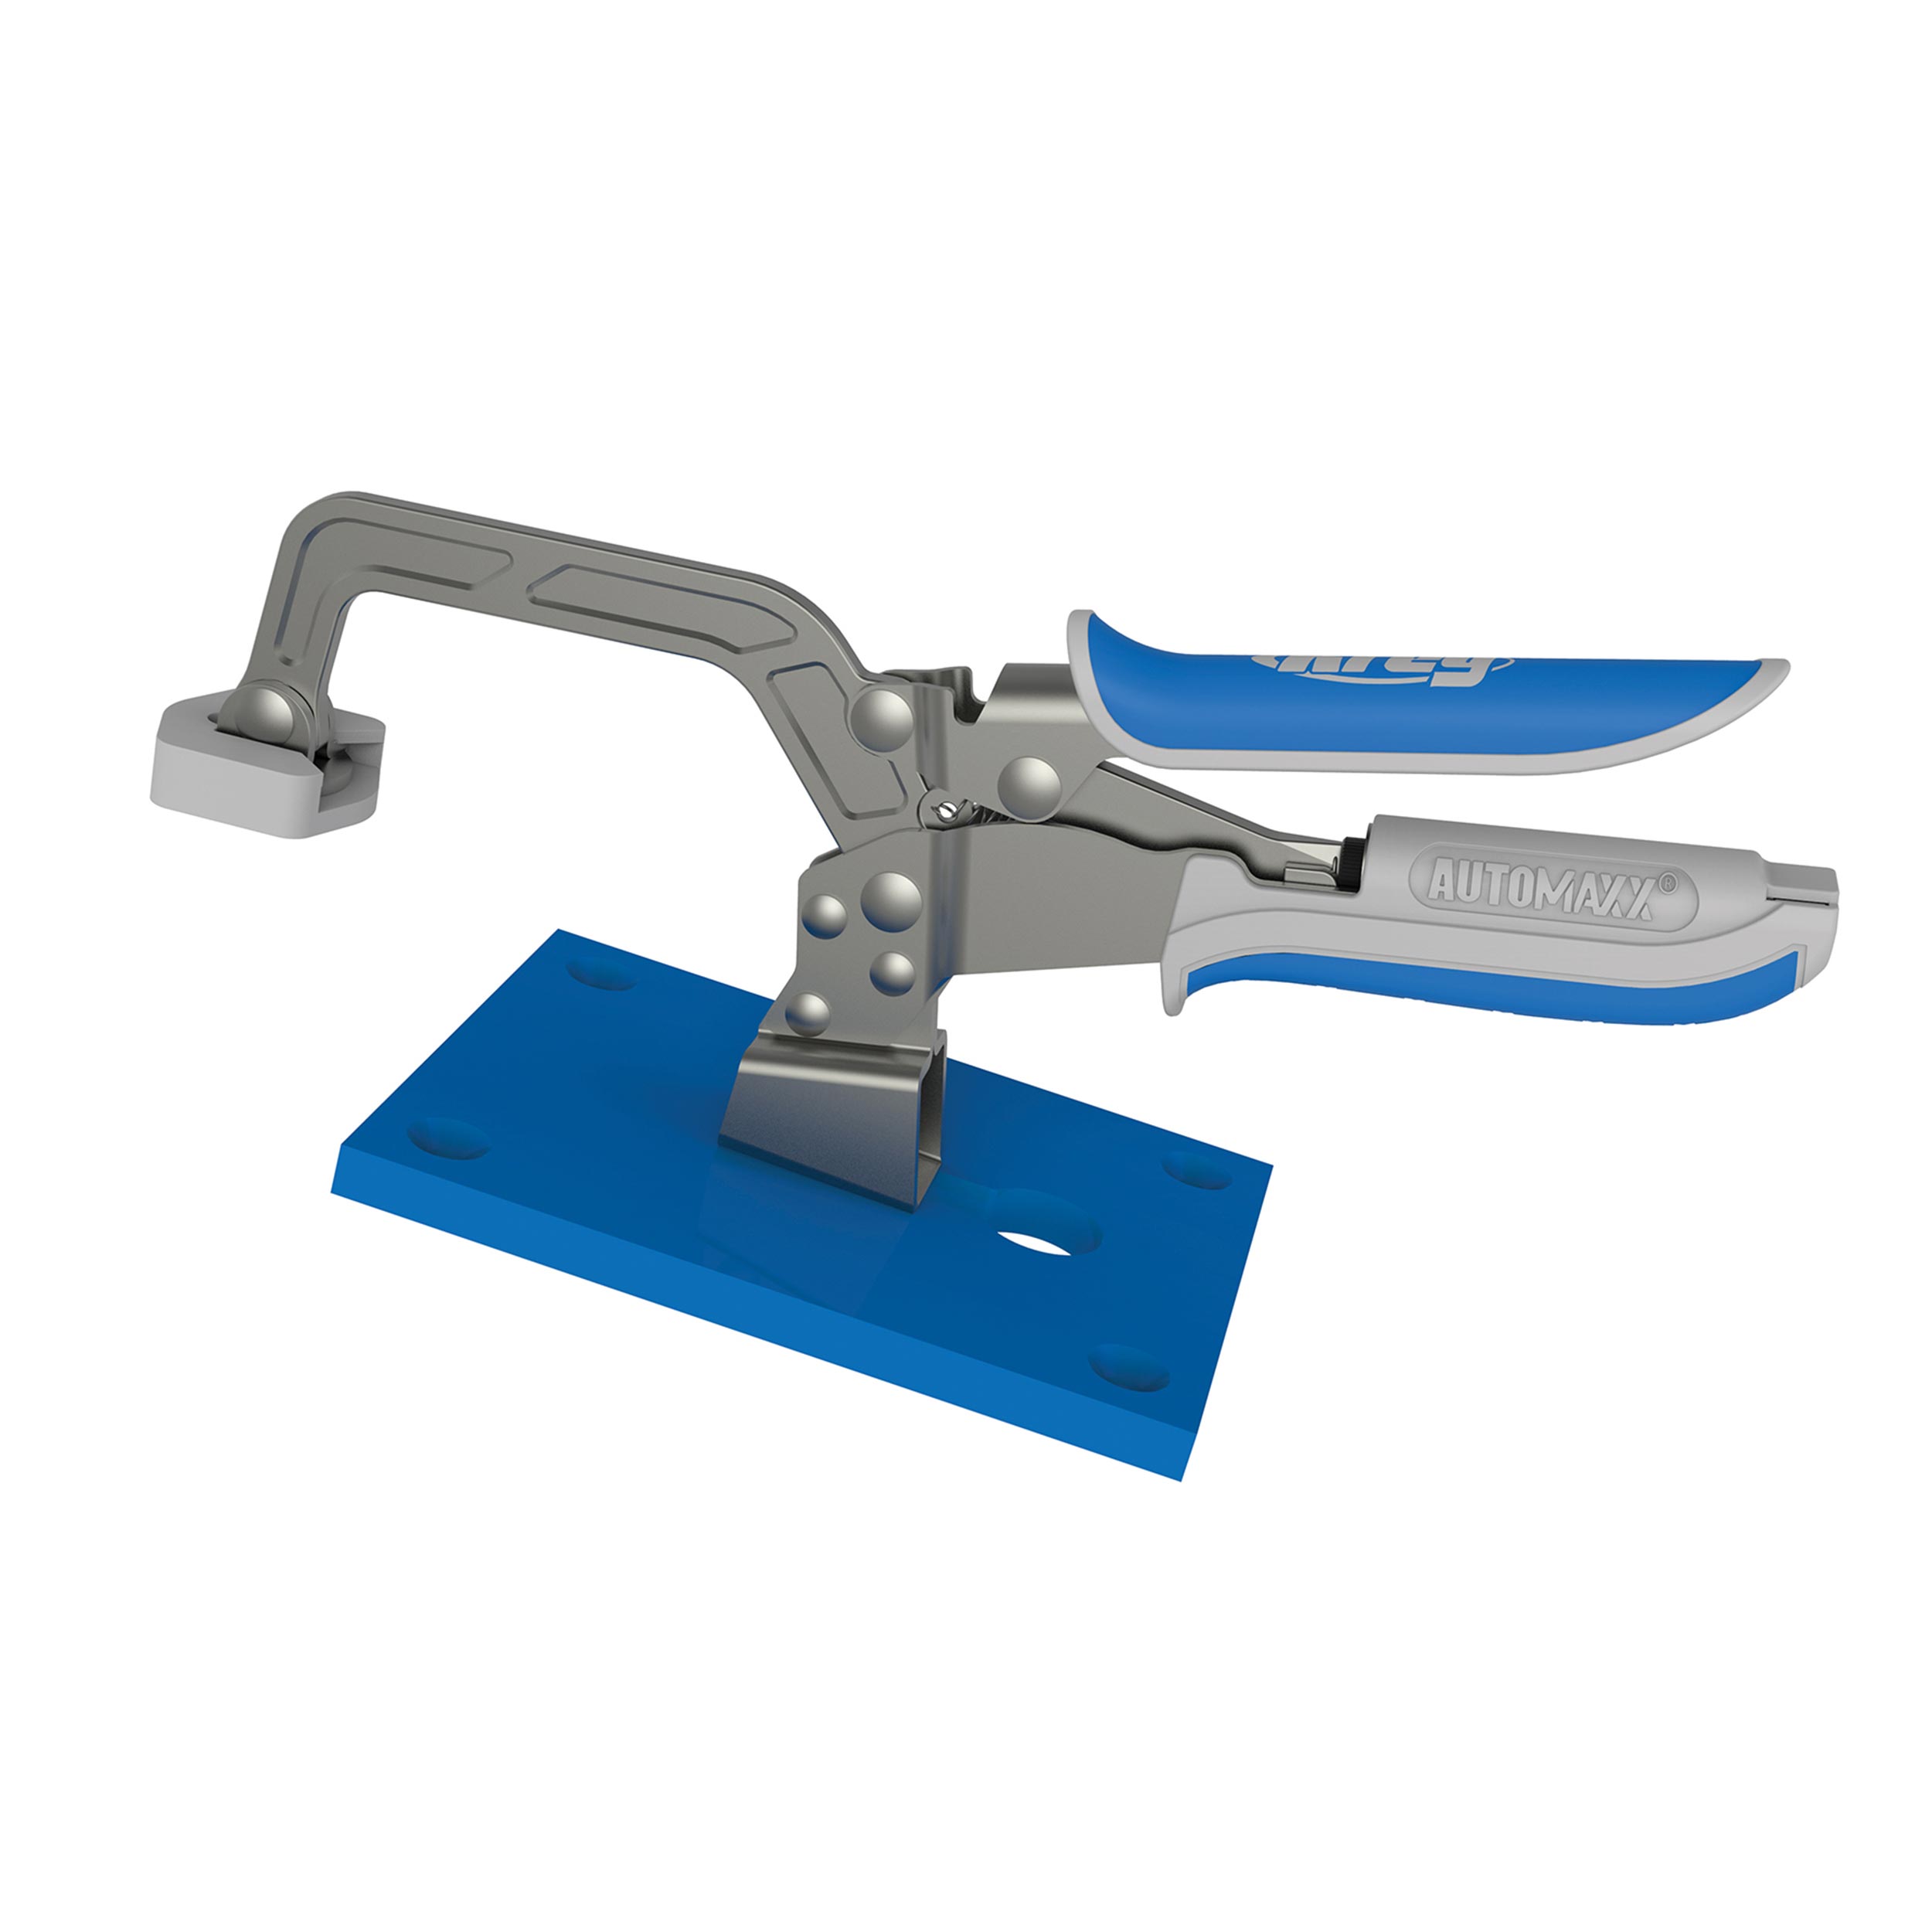 Automaxx 3" Bench Clamp System, # Kbc3-sys